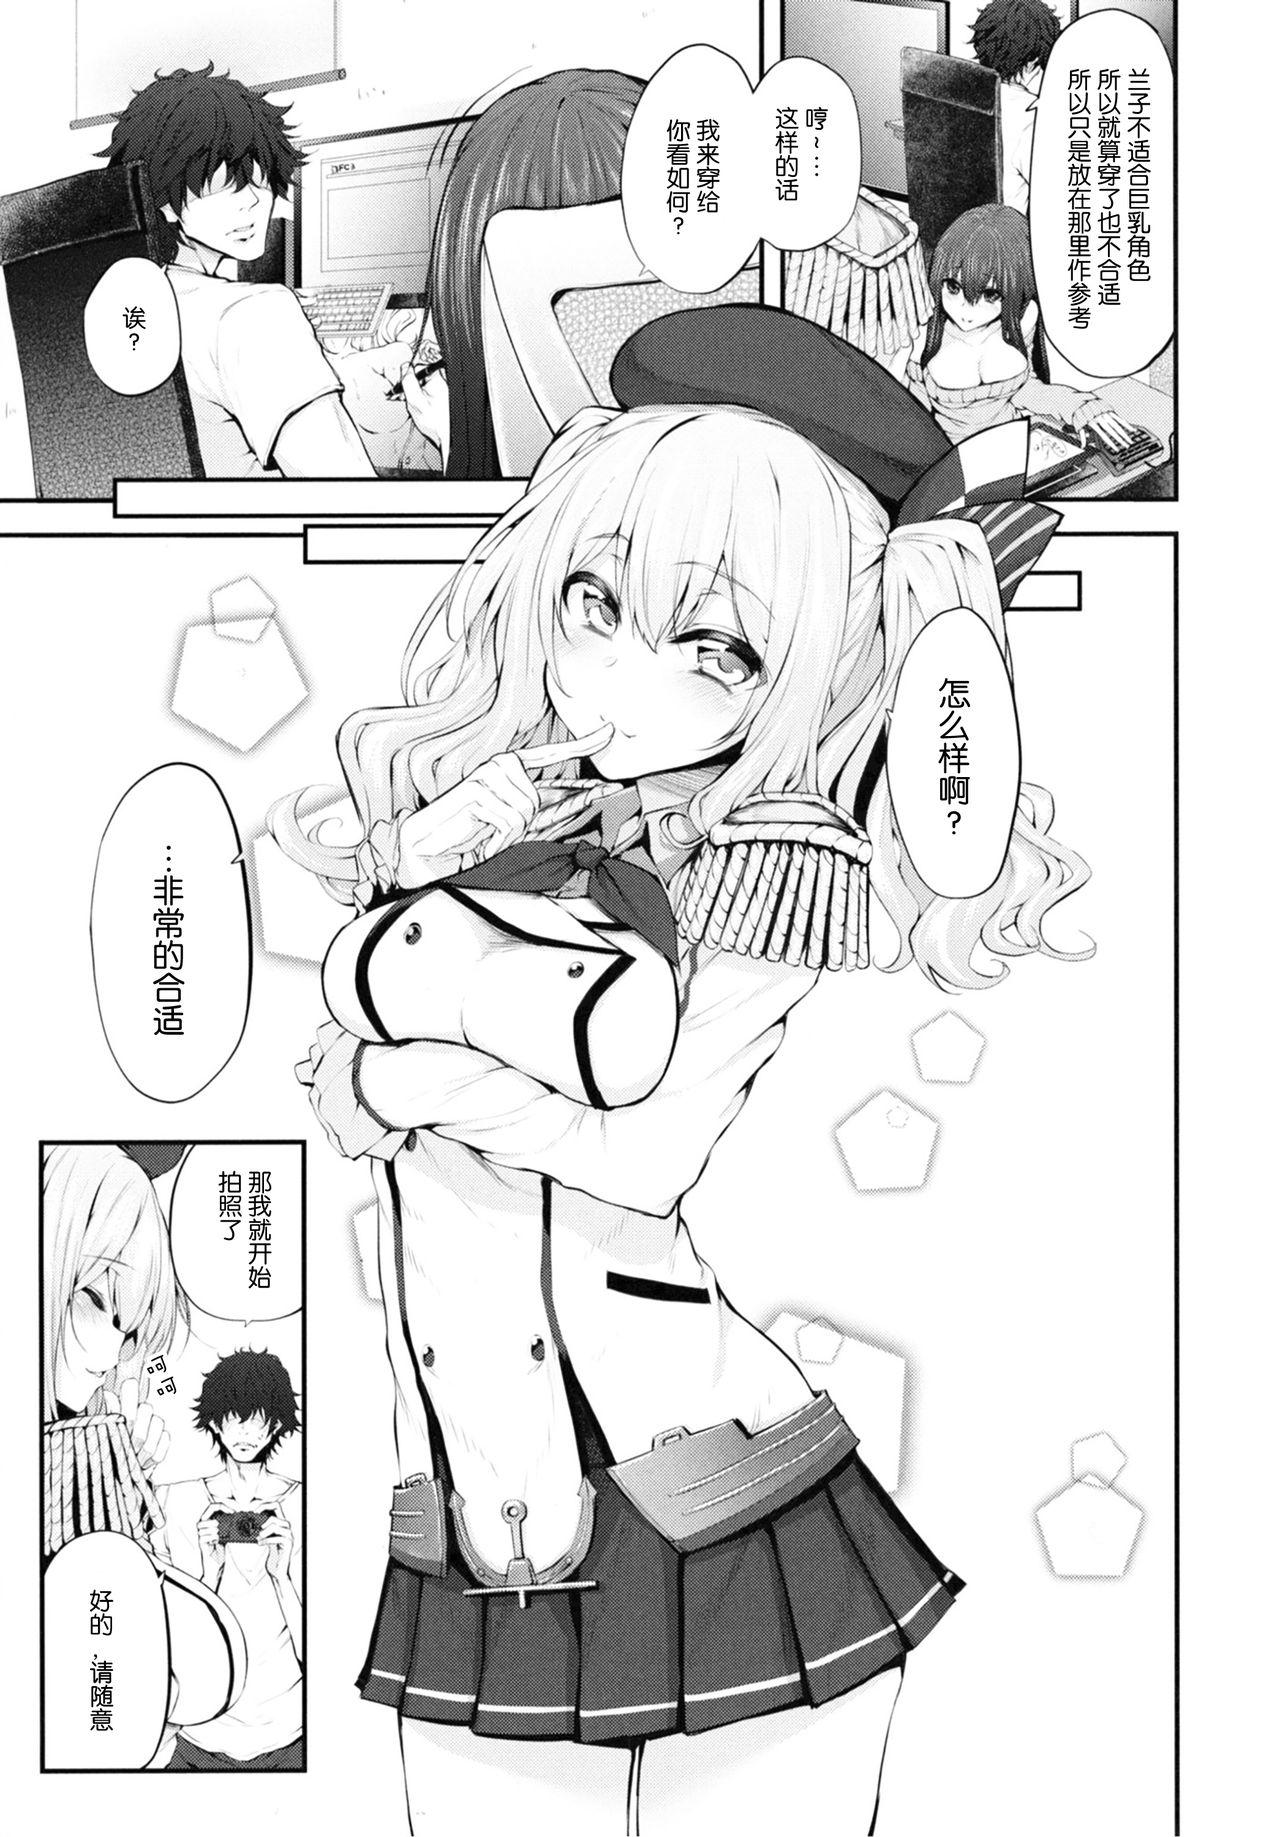 Russia COSBITCH! Marked-girls Origin Vol. 1 - Kantai collection Asians - Page 9